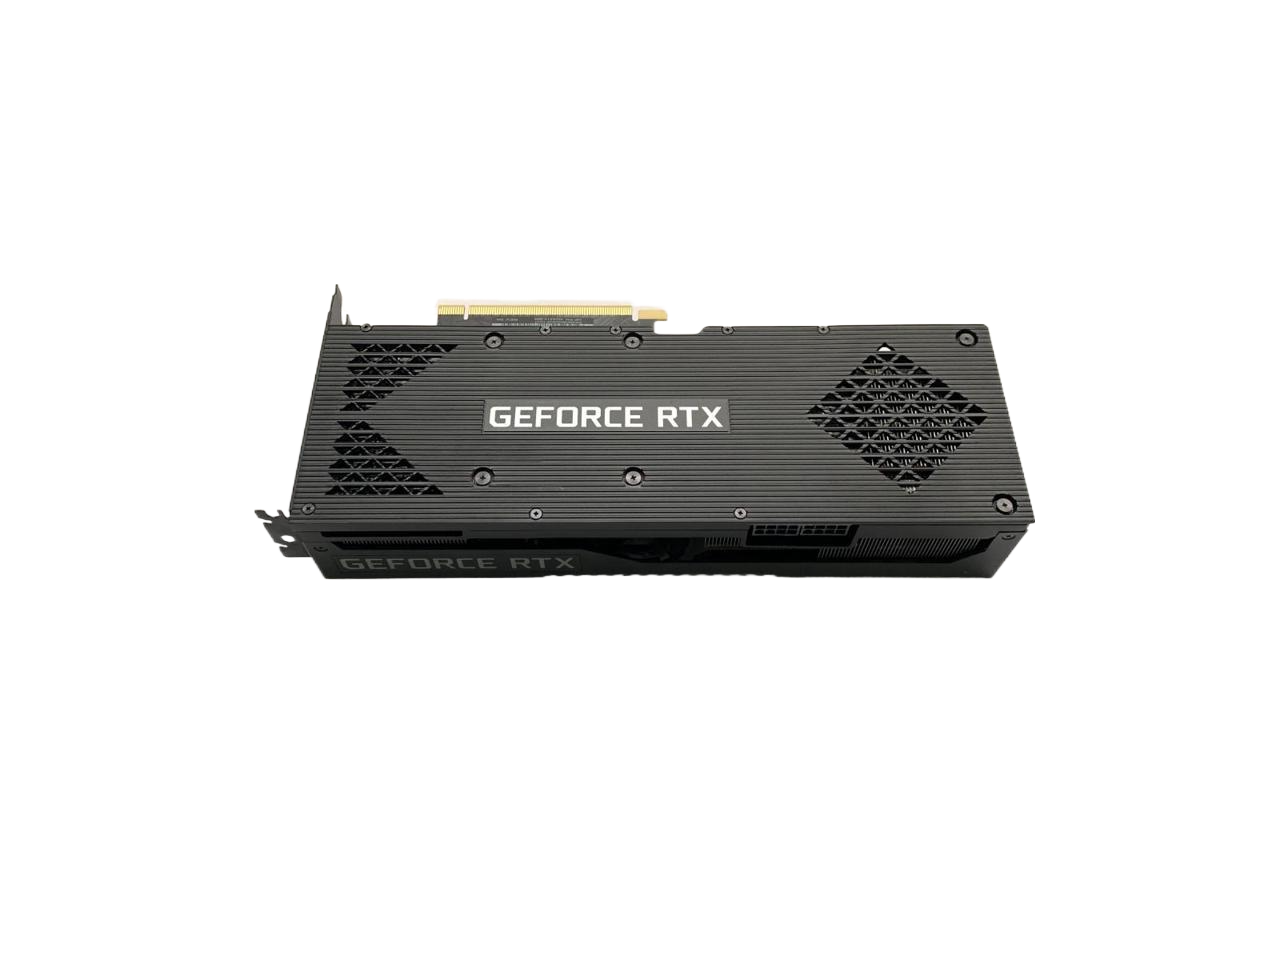 HP NVIDIA RTX 3090 FHR M24410-001 Gaming Video Graphics Card Ampere GPU 24GB GDDR6X Non-LHR Full Hash Rate